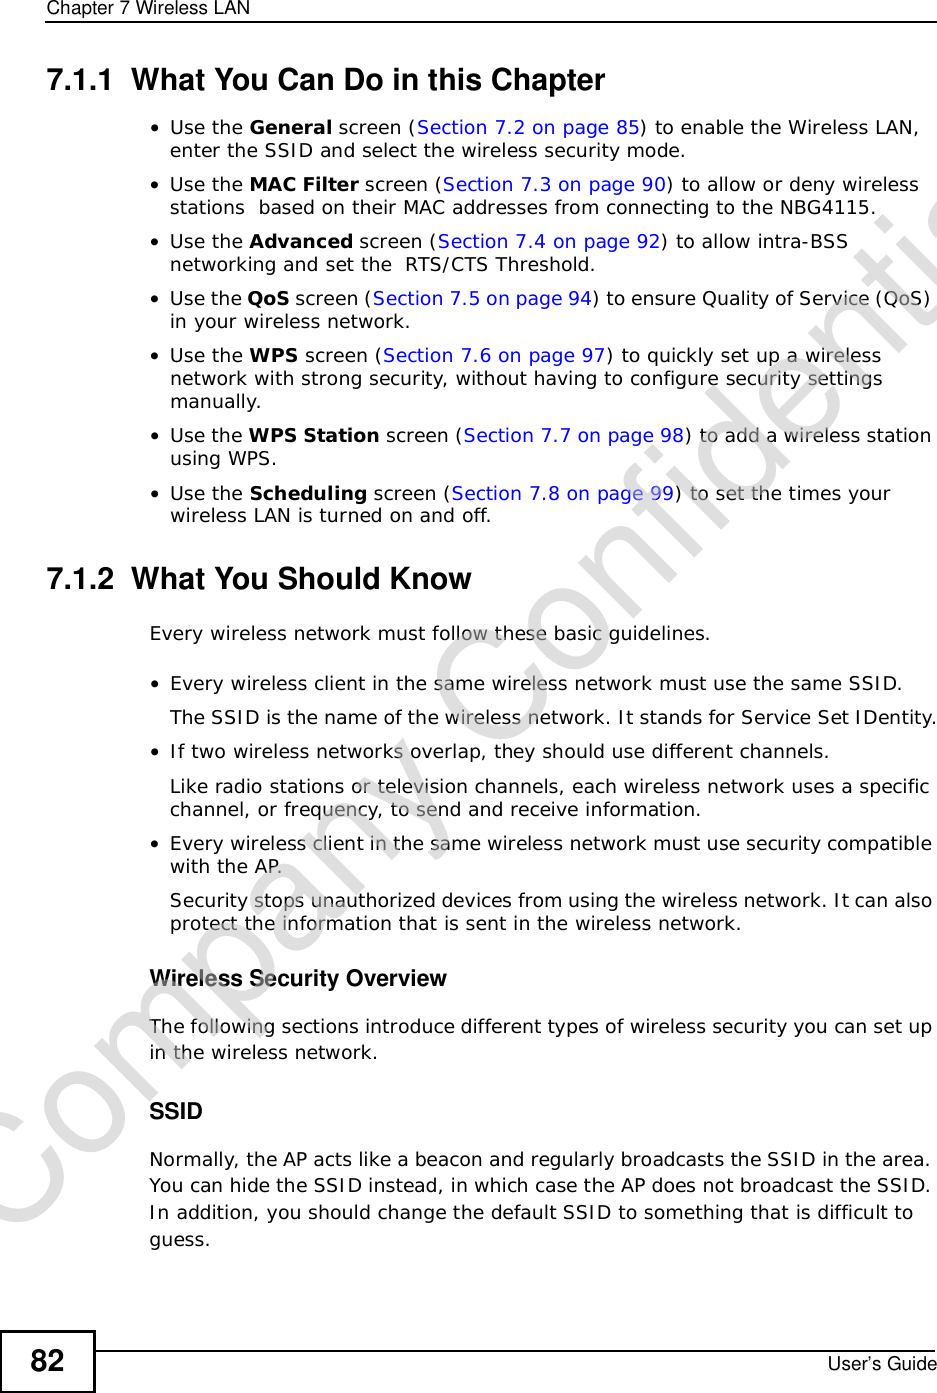 Chapter 7Wireless LANUser’s Guide827.1.1  What You Can Do in this Chapter•Use the General screen (Section 7.2 on page 85) to enable the Wireless LAN, enter the SSID and select the wireless security mode.•Use the MAC Filter screen (Section 7.3 on page 90) to allow or deny wireless stations  based on their MAC addresses from connecting to the NBG4115.•Use the Advanced screen (Section 7.4 on page 92) to allow intra-BSS networking and set the  RTS/CTS Threshold.•Use the QoS screen (Section 7.5 on page 94) to ensure Quality of Service (QoS) in your wireless network.•Use the WPS screen (Section 7.6 on page 97) to quickly set up a wireless network with strong security, without having to configure security settings manually.•Use the WPS Station screen (Section 7.7 on page 98) to add a wireless station using WPS. •Use the Scheduling screen (Section 7.8 on page 99) to set the times your wireless LAN is turned on and off.7.1.2  What You Should KnowEvery wireless network must follow these basic guidelines.•Every wireless client in the same wireless network must use the same SSID.The SSID is the name of the wireless network. It stands for Service Set IDentity.•If two wireless networks overlap, they should use different channels.Like radio stations or television channels, each wireless network uses a specific channel, or frequency, to send and receive information.•Every wireless client in the same wireless network must use security compatible with the AP.Security stops unauthorized devices from using the wireless network. It can also protect the information that is sent in the wireless network.Wireless Security OverviewThe following sections introduce different types of wireless security you can set up in the wireless network.SSIDNormally, the AP acts like a beacon and regularly broadcasts the SSID in the area. You can hide the SSID instead, in which case the AP does not broadcast the SSID. In addition, you should change the default SSID to something that is difficult to guess.Company Confidential